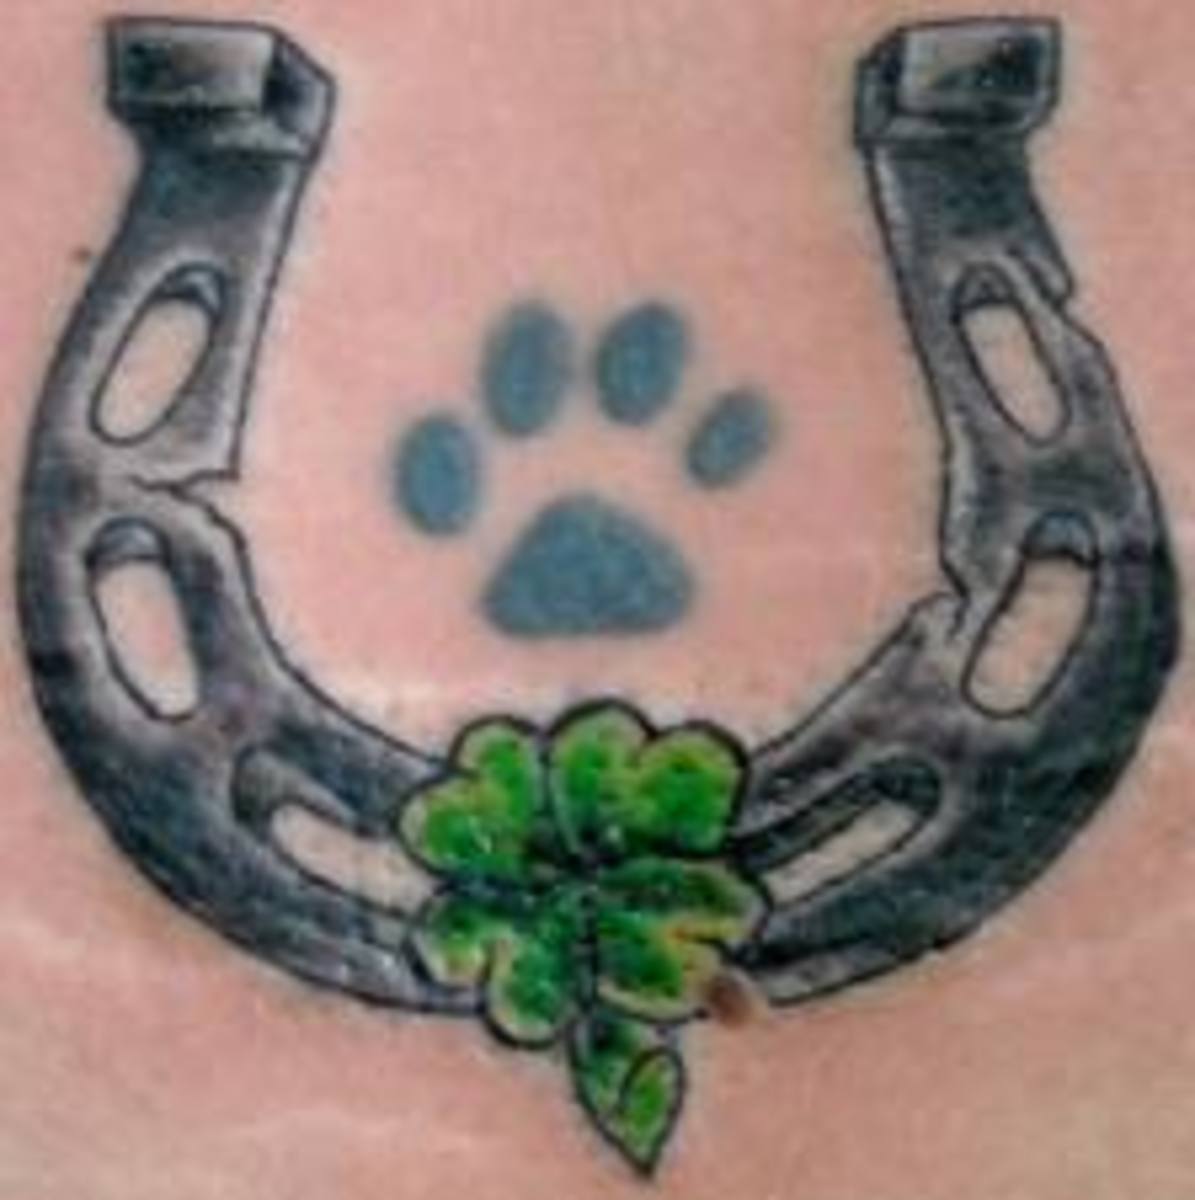 horseshoe-tattoo-designs-ideas-and-meanings-horseshoe-tattoo-pictures